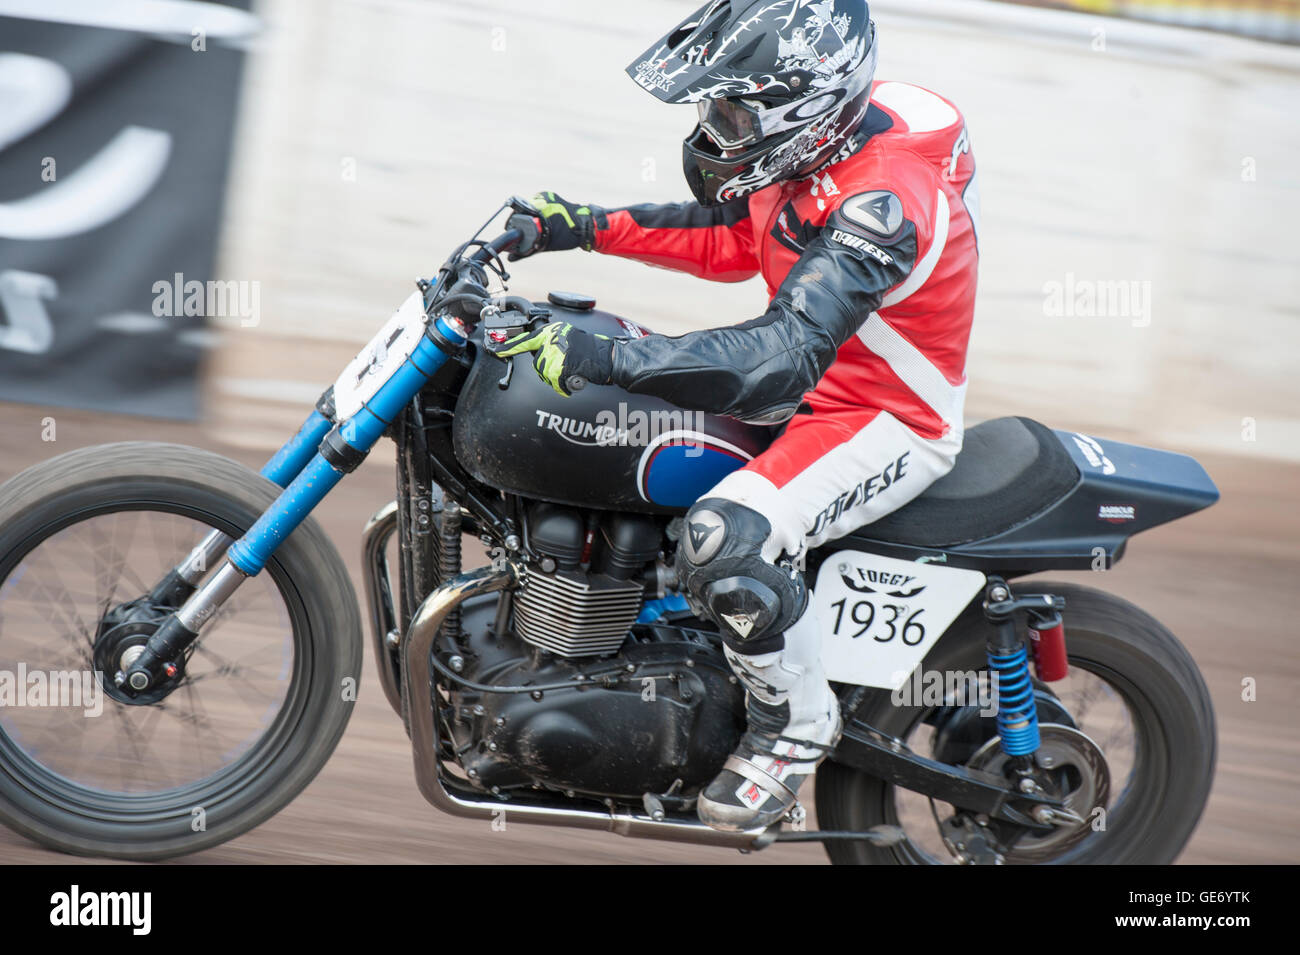 Kings Lynn, Norfolk, United Kingdom. 16.07.2016. Fifth annual Dirt Quake festival with Guy Martin and Carl 'Foggy' Fogarty (pictured). Stock Photo